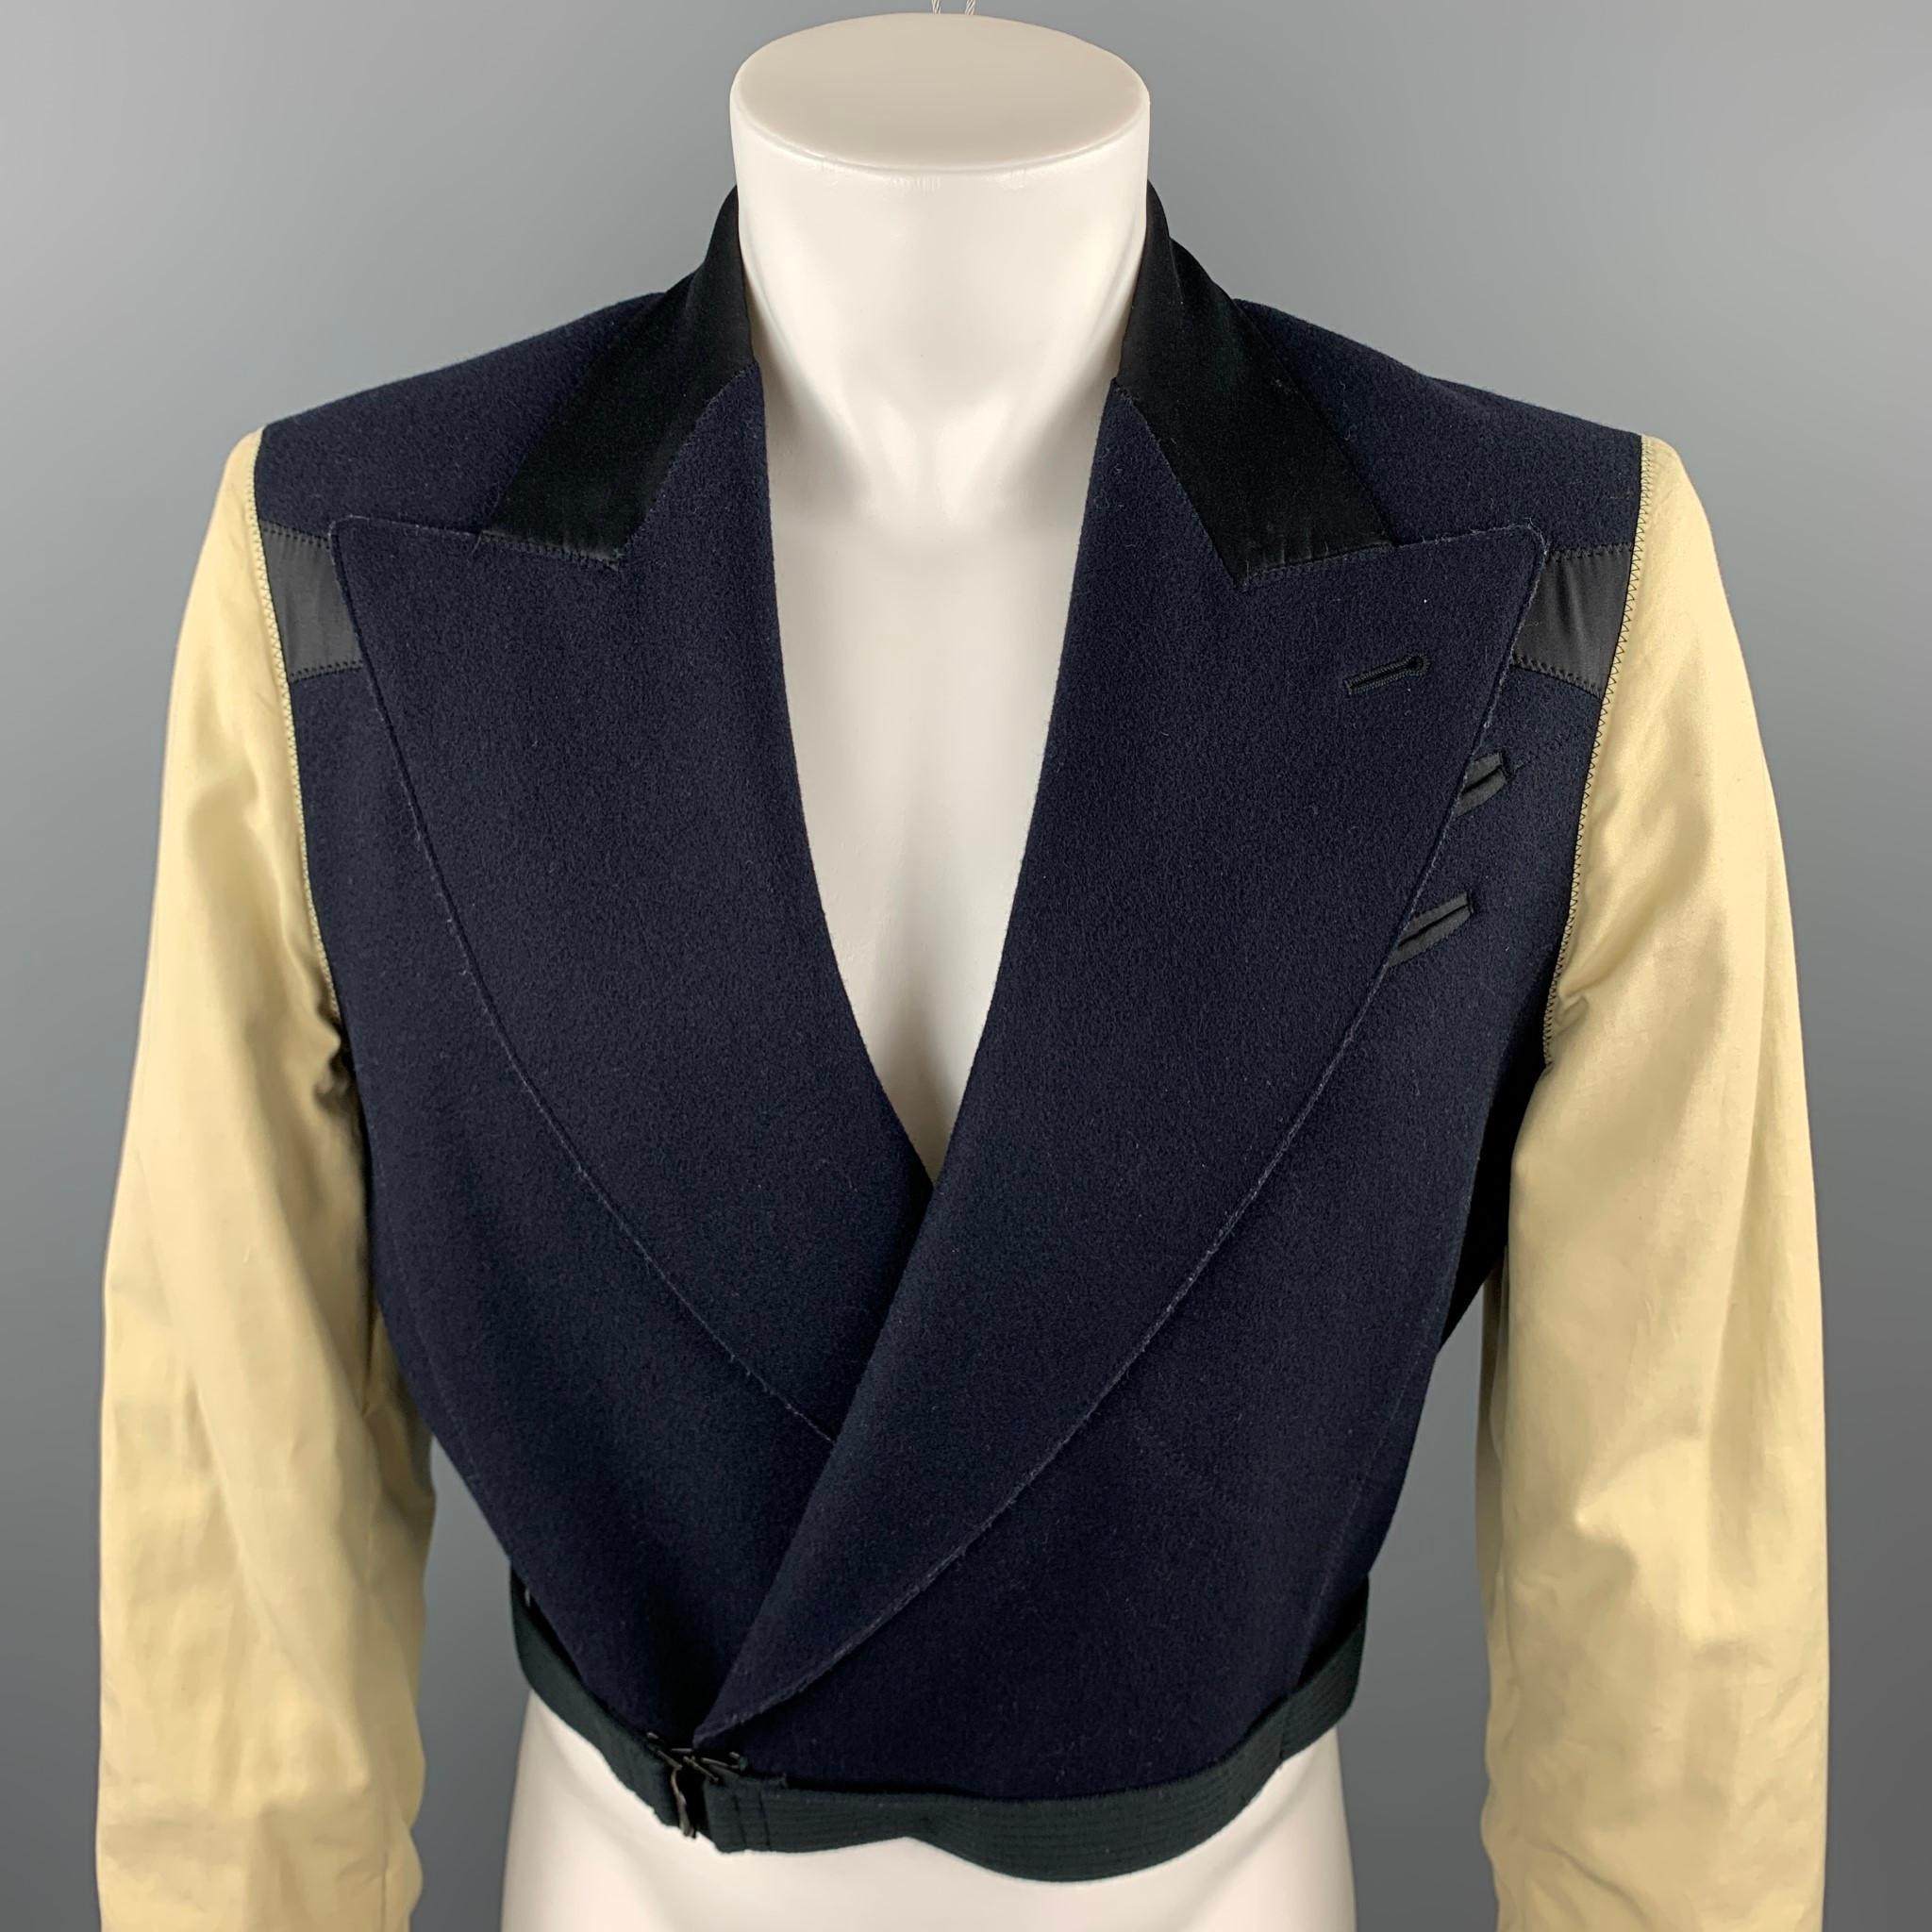 Vintage JEAN PAUL GAULTIER jacket comes in a navy & beige mixed fabric wool featuring a cropped style, peak lapel, strap detail, and a hook & eye closure. Made in Italy. 

Very Good Pre-Owned Condition.
Marked: IT 46

Measurements:

Shoulder: 18 in.